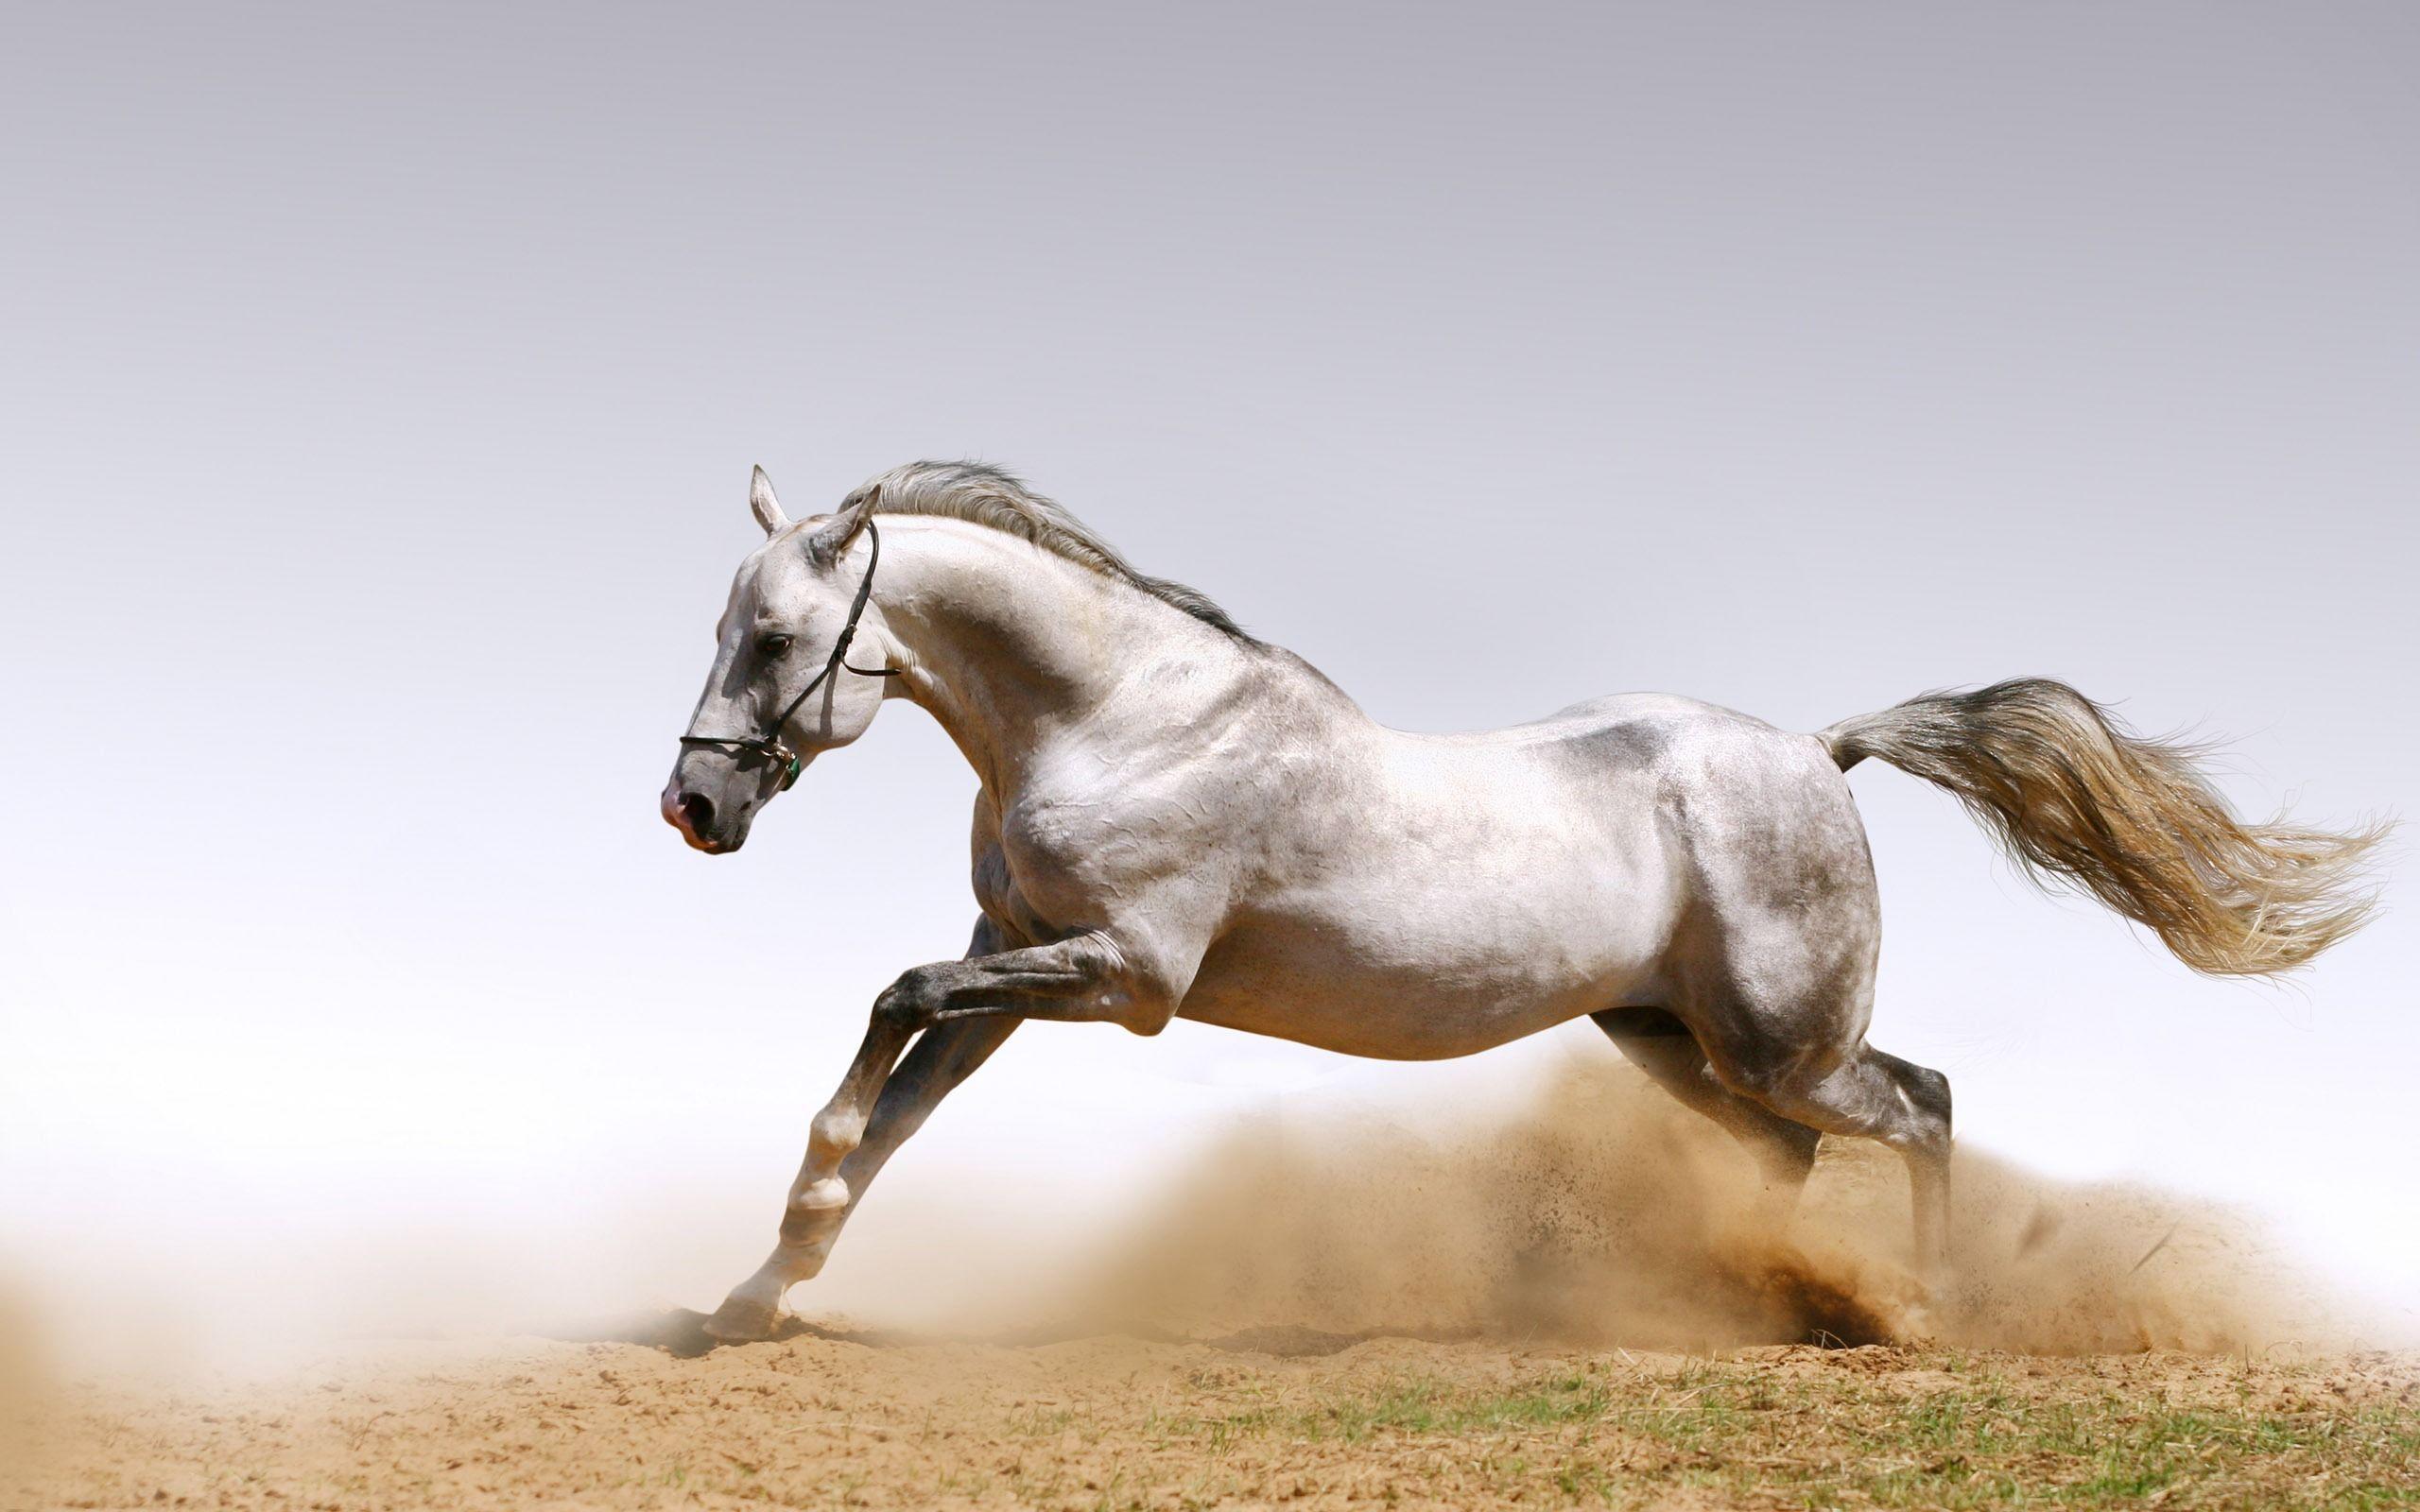 A selection of 10 Image of Horses in HD quality